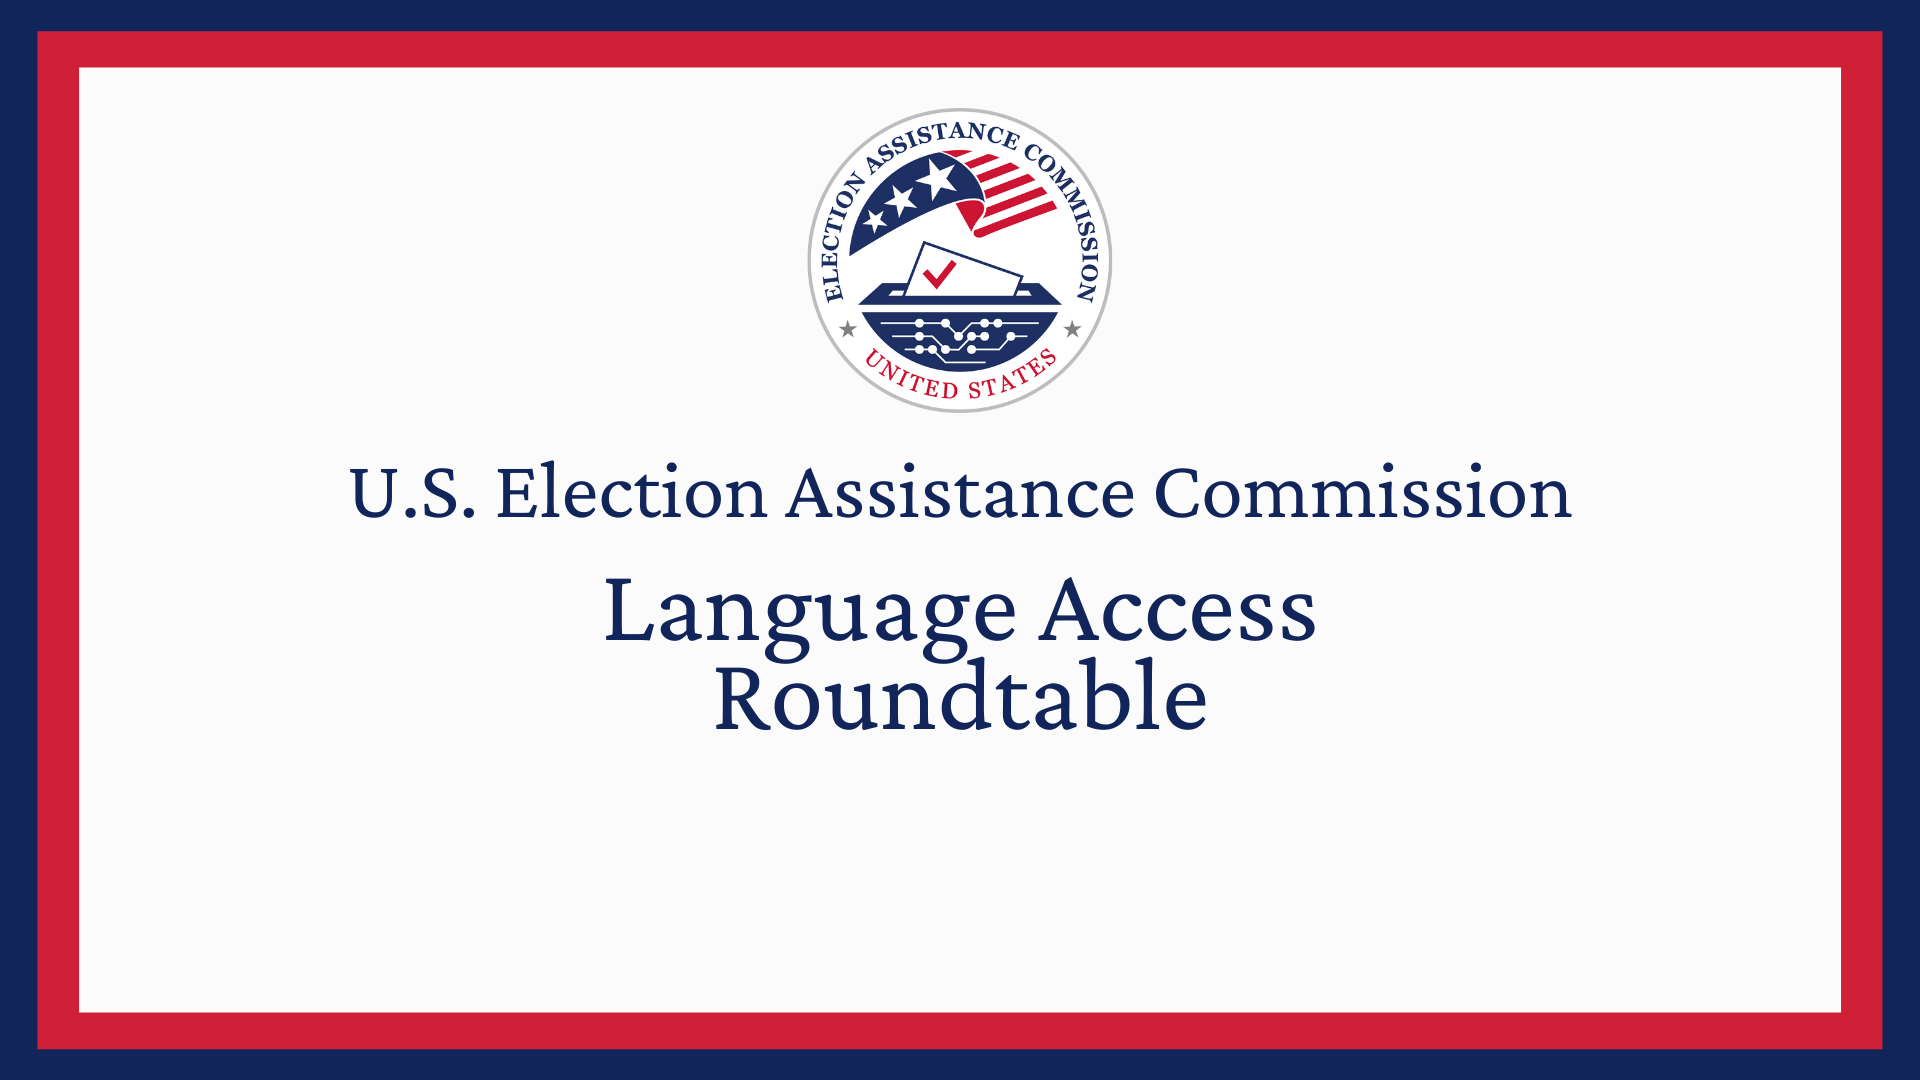 U.S. EAC Seal with the text " U.S. Election Assistance Commission, Language Access Roundtable"